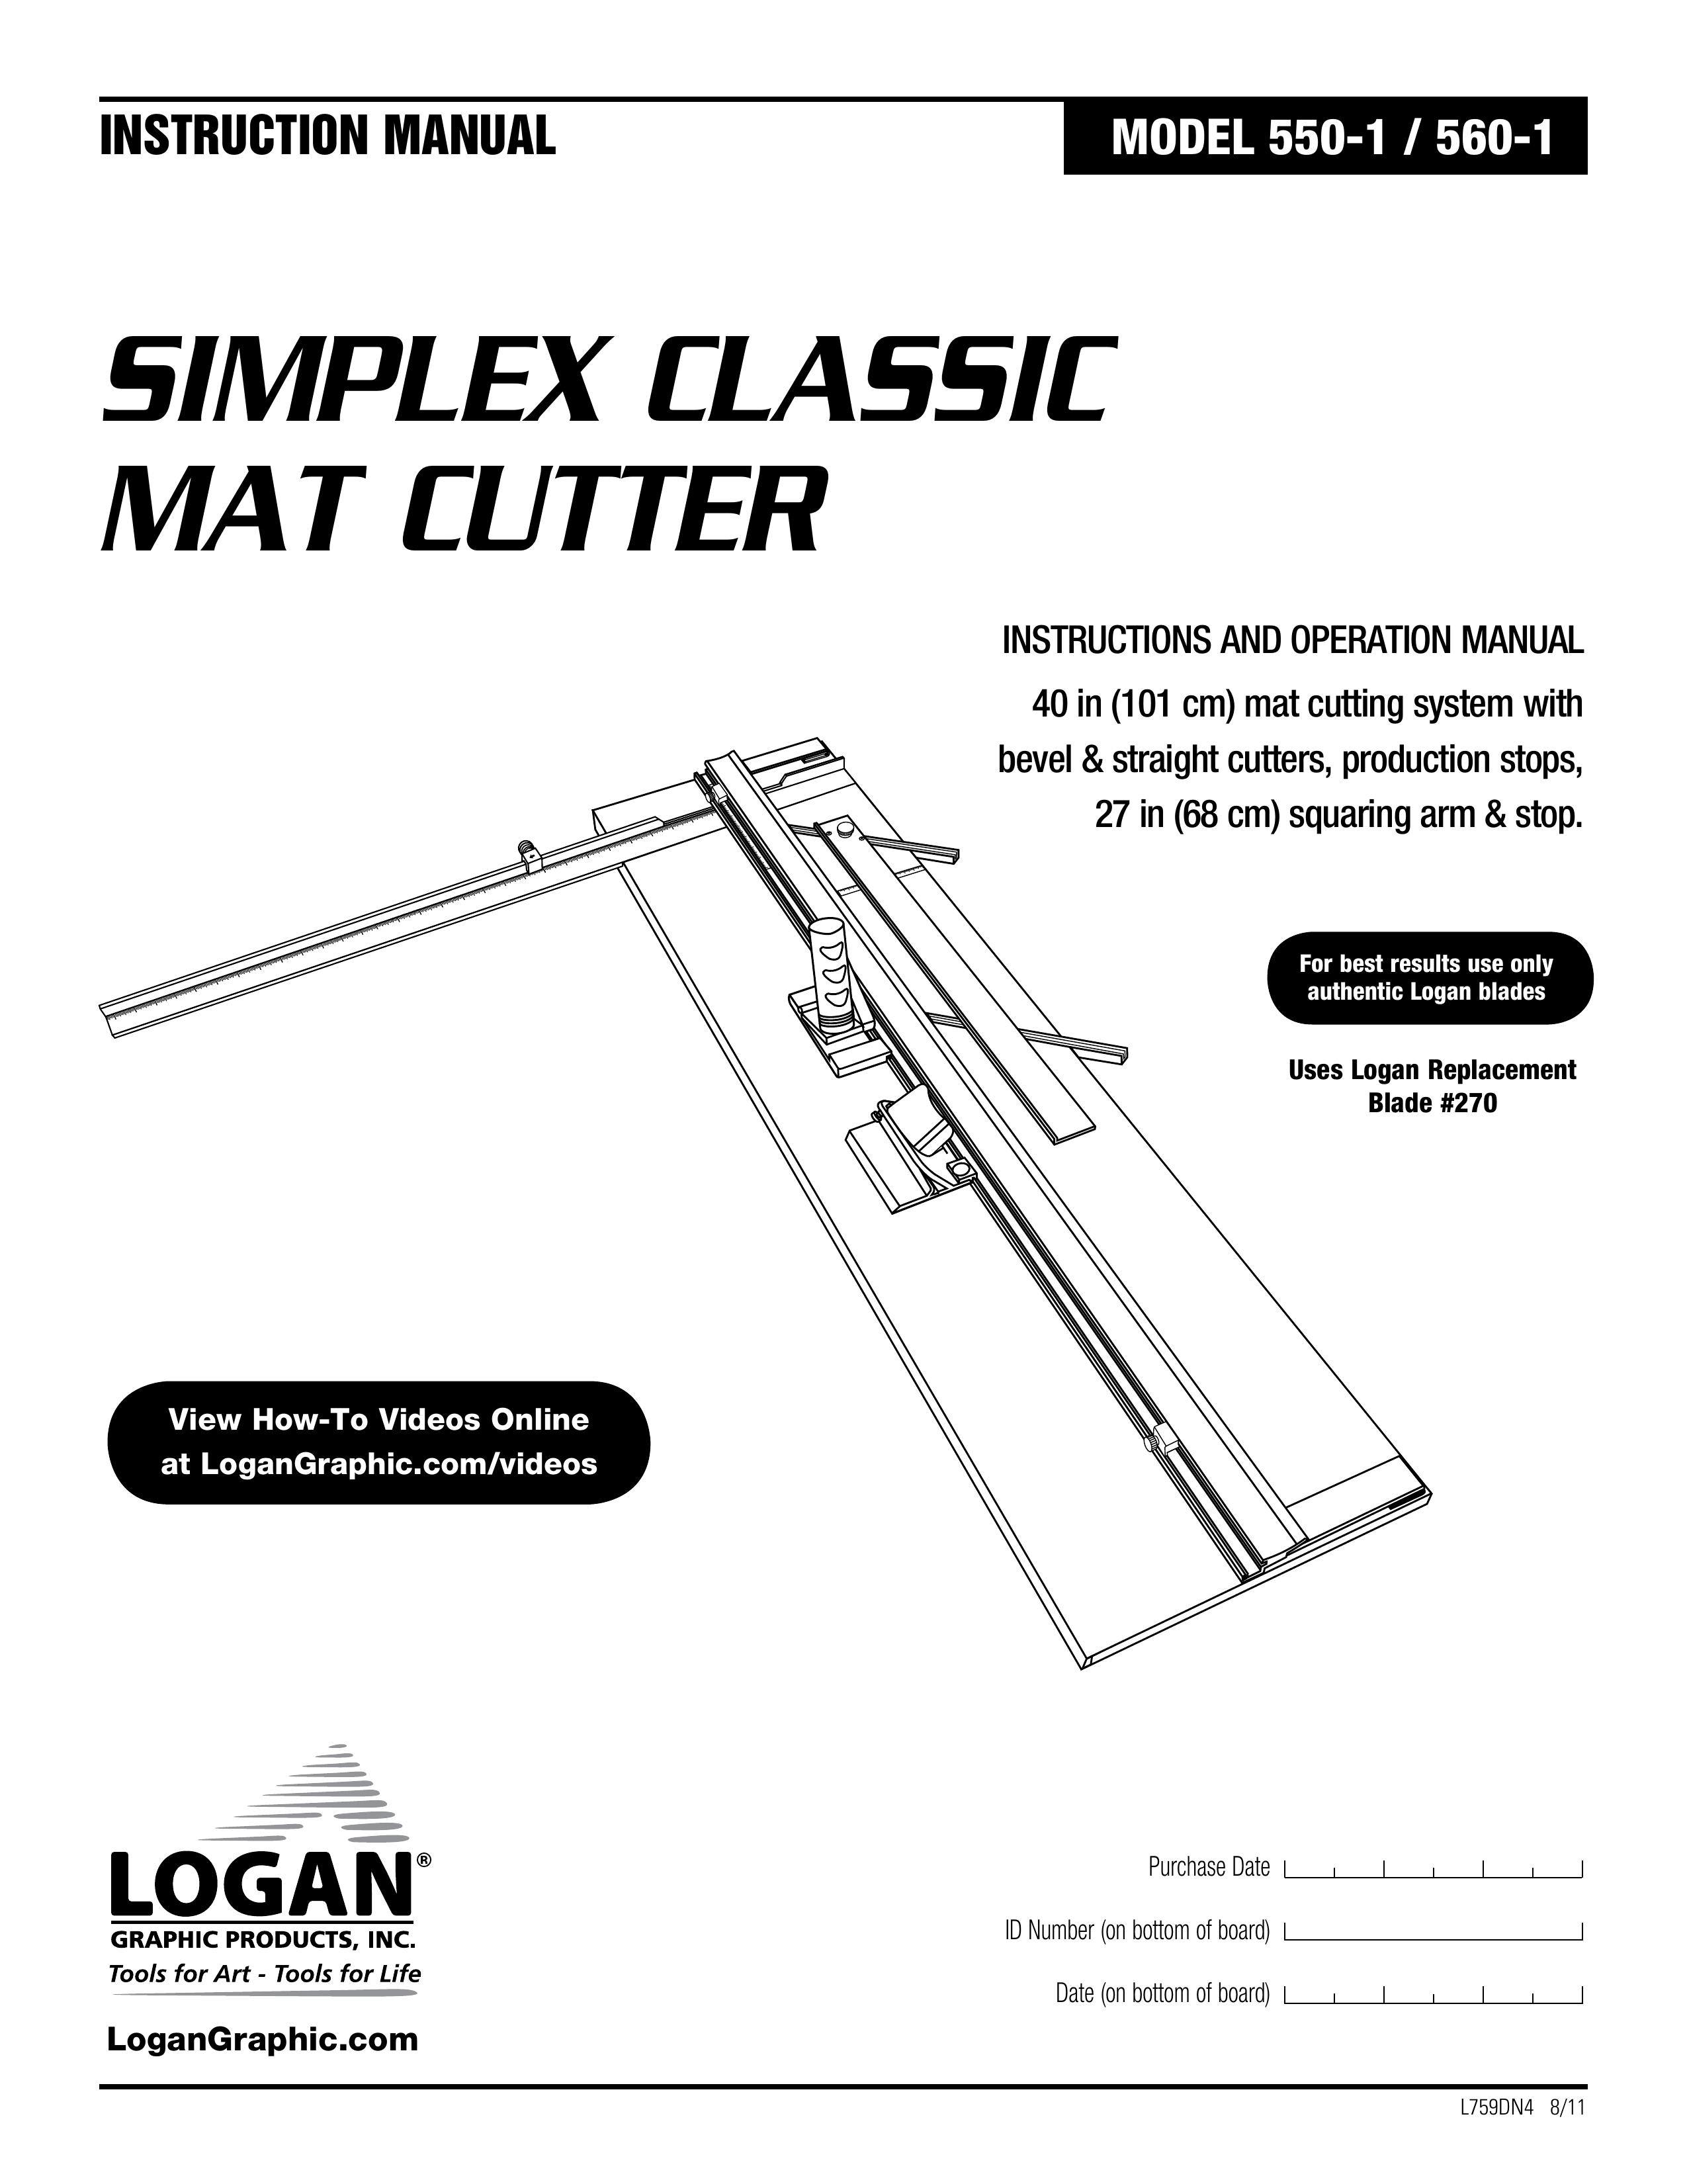 Logan Graphic Products 550-1 Brush Cutter User Manual